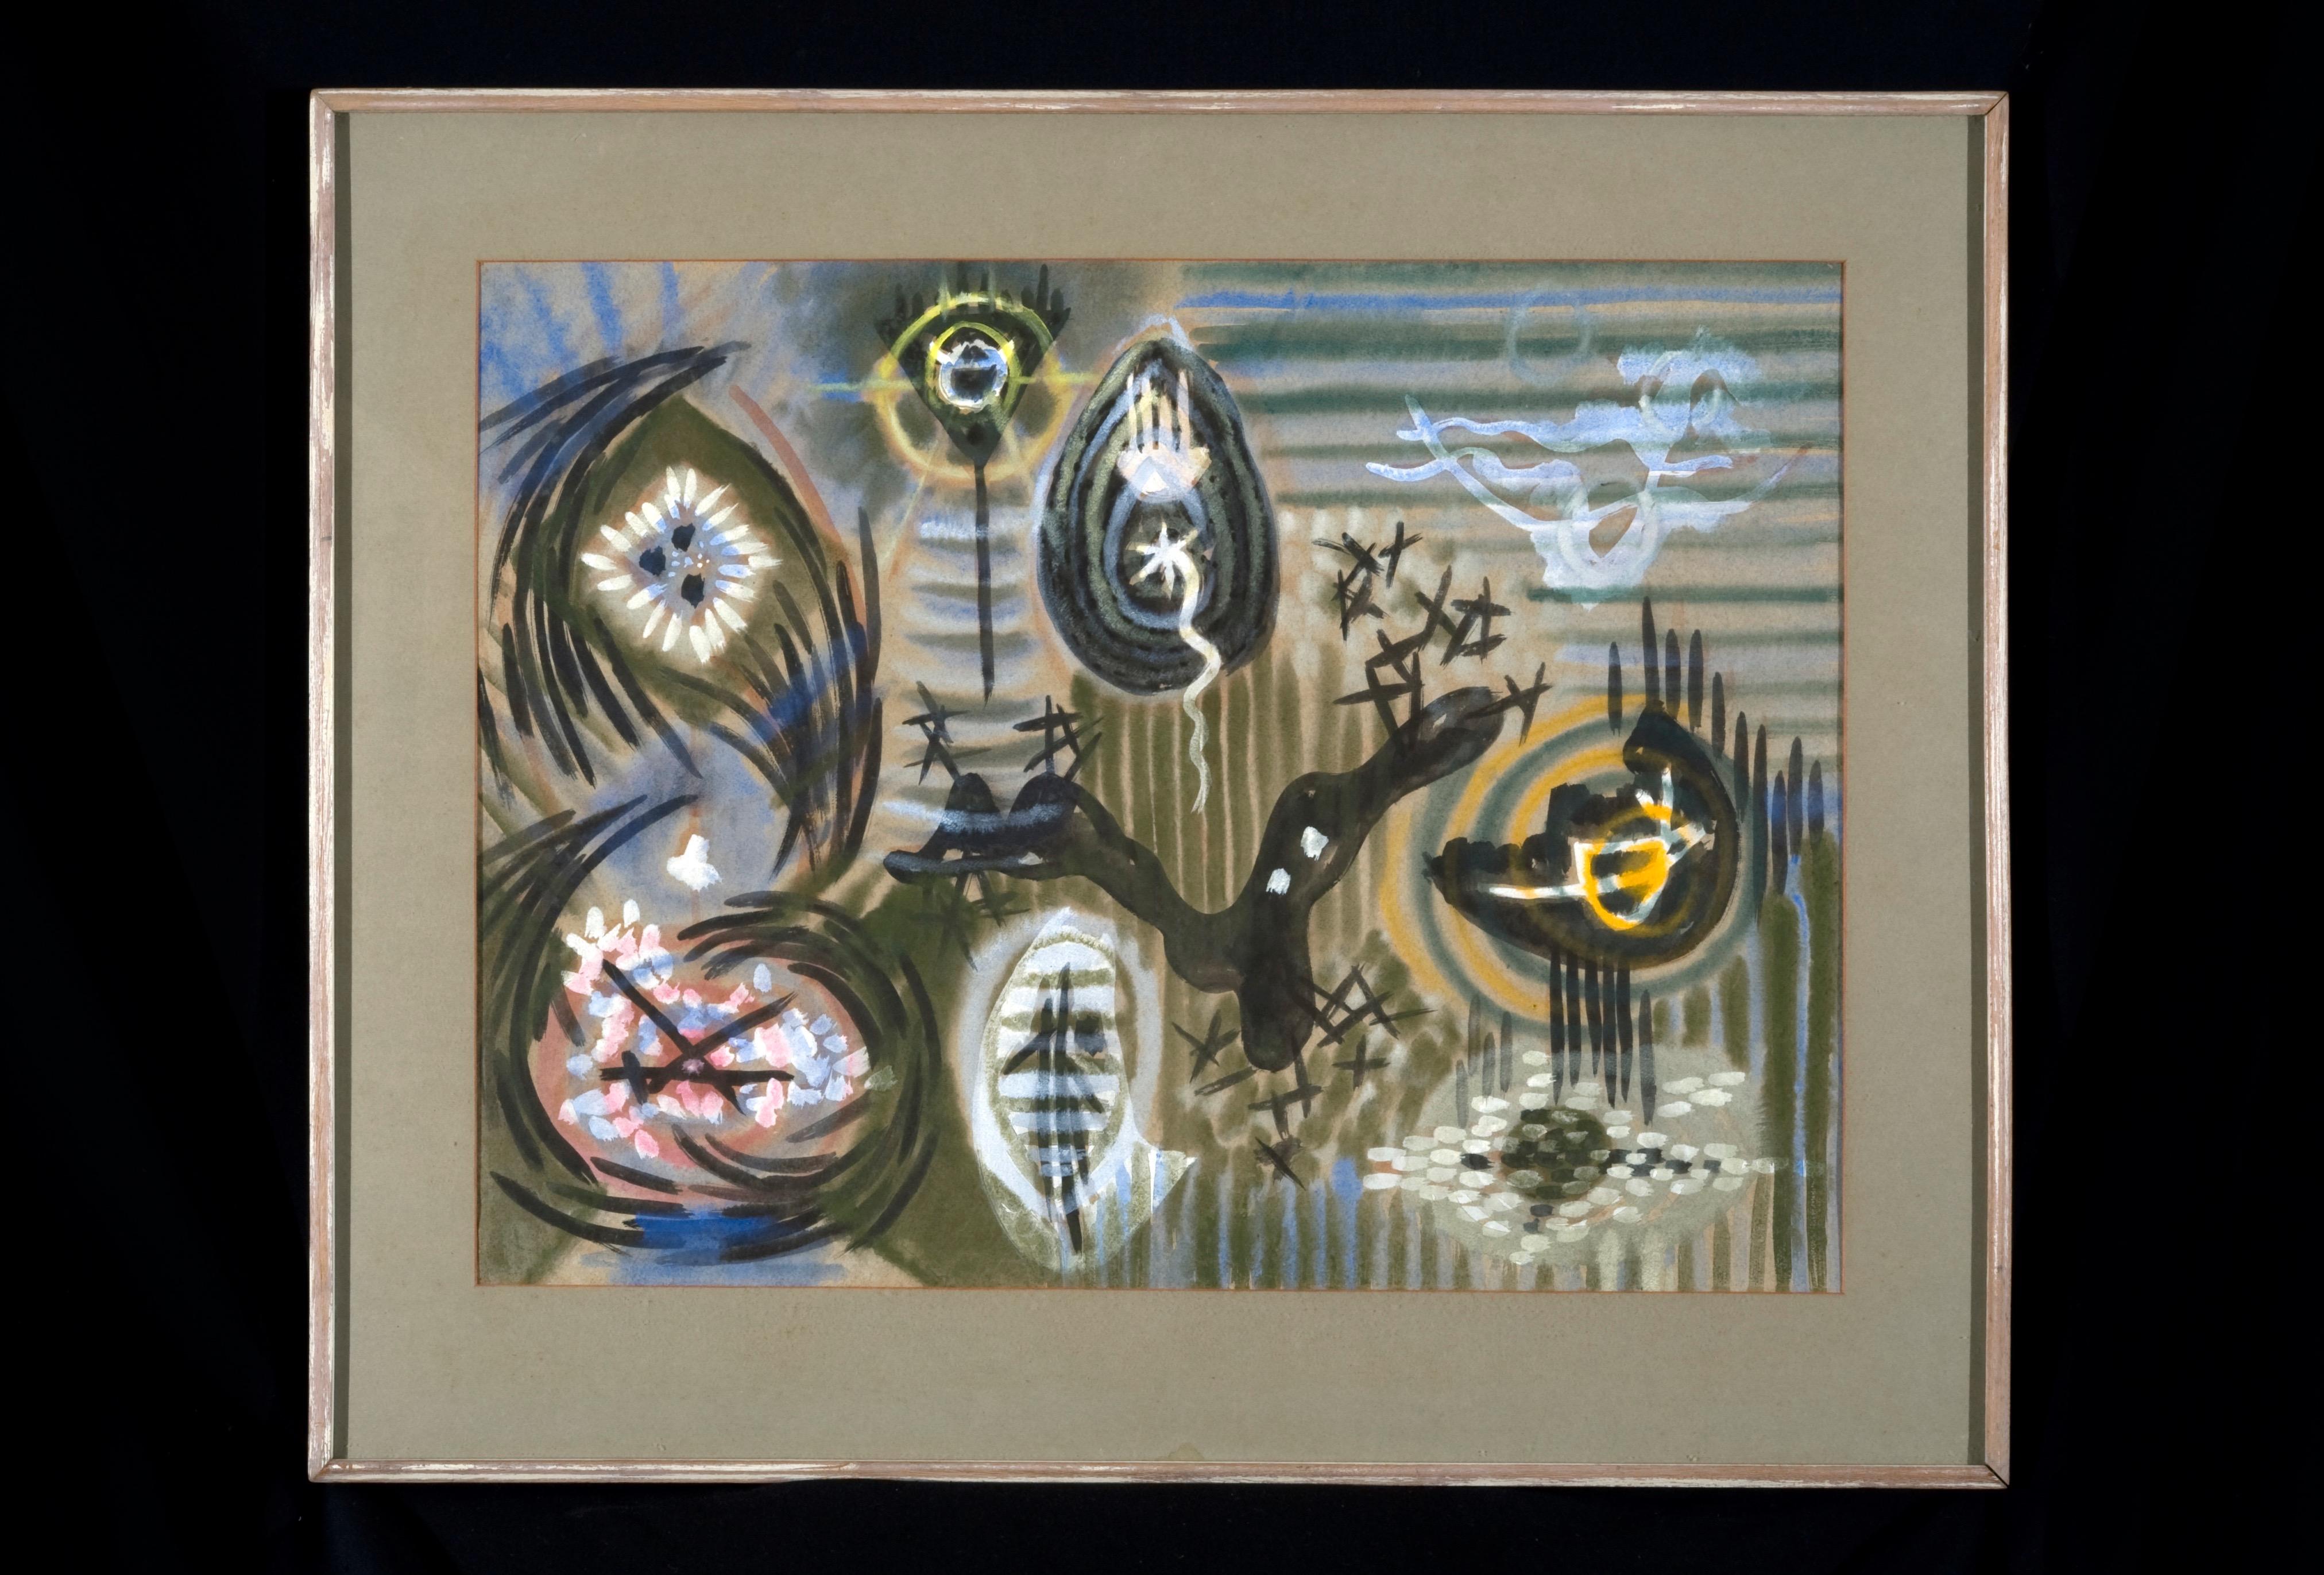 Gordon Onslow-Ford (American/English 1912-2003)
“Moongrowers”, 1951
Mixed Media on Paper
18.5 x 24.5 inches (sight dimensions)
25 x 30.5 inches framed

Gordon Onslow Ford began his artistic career in Paris in the late 30′s where he was part of the